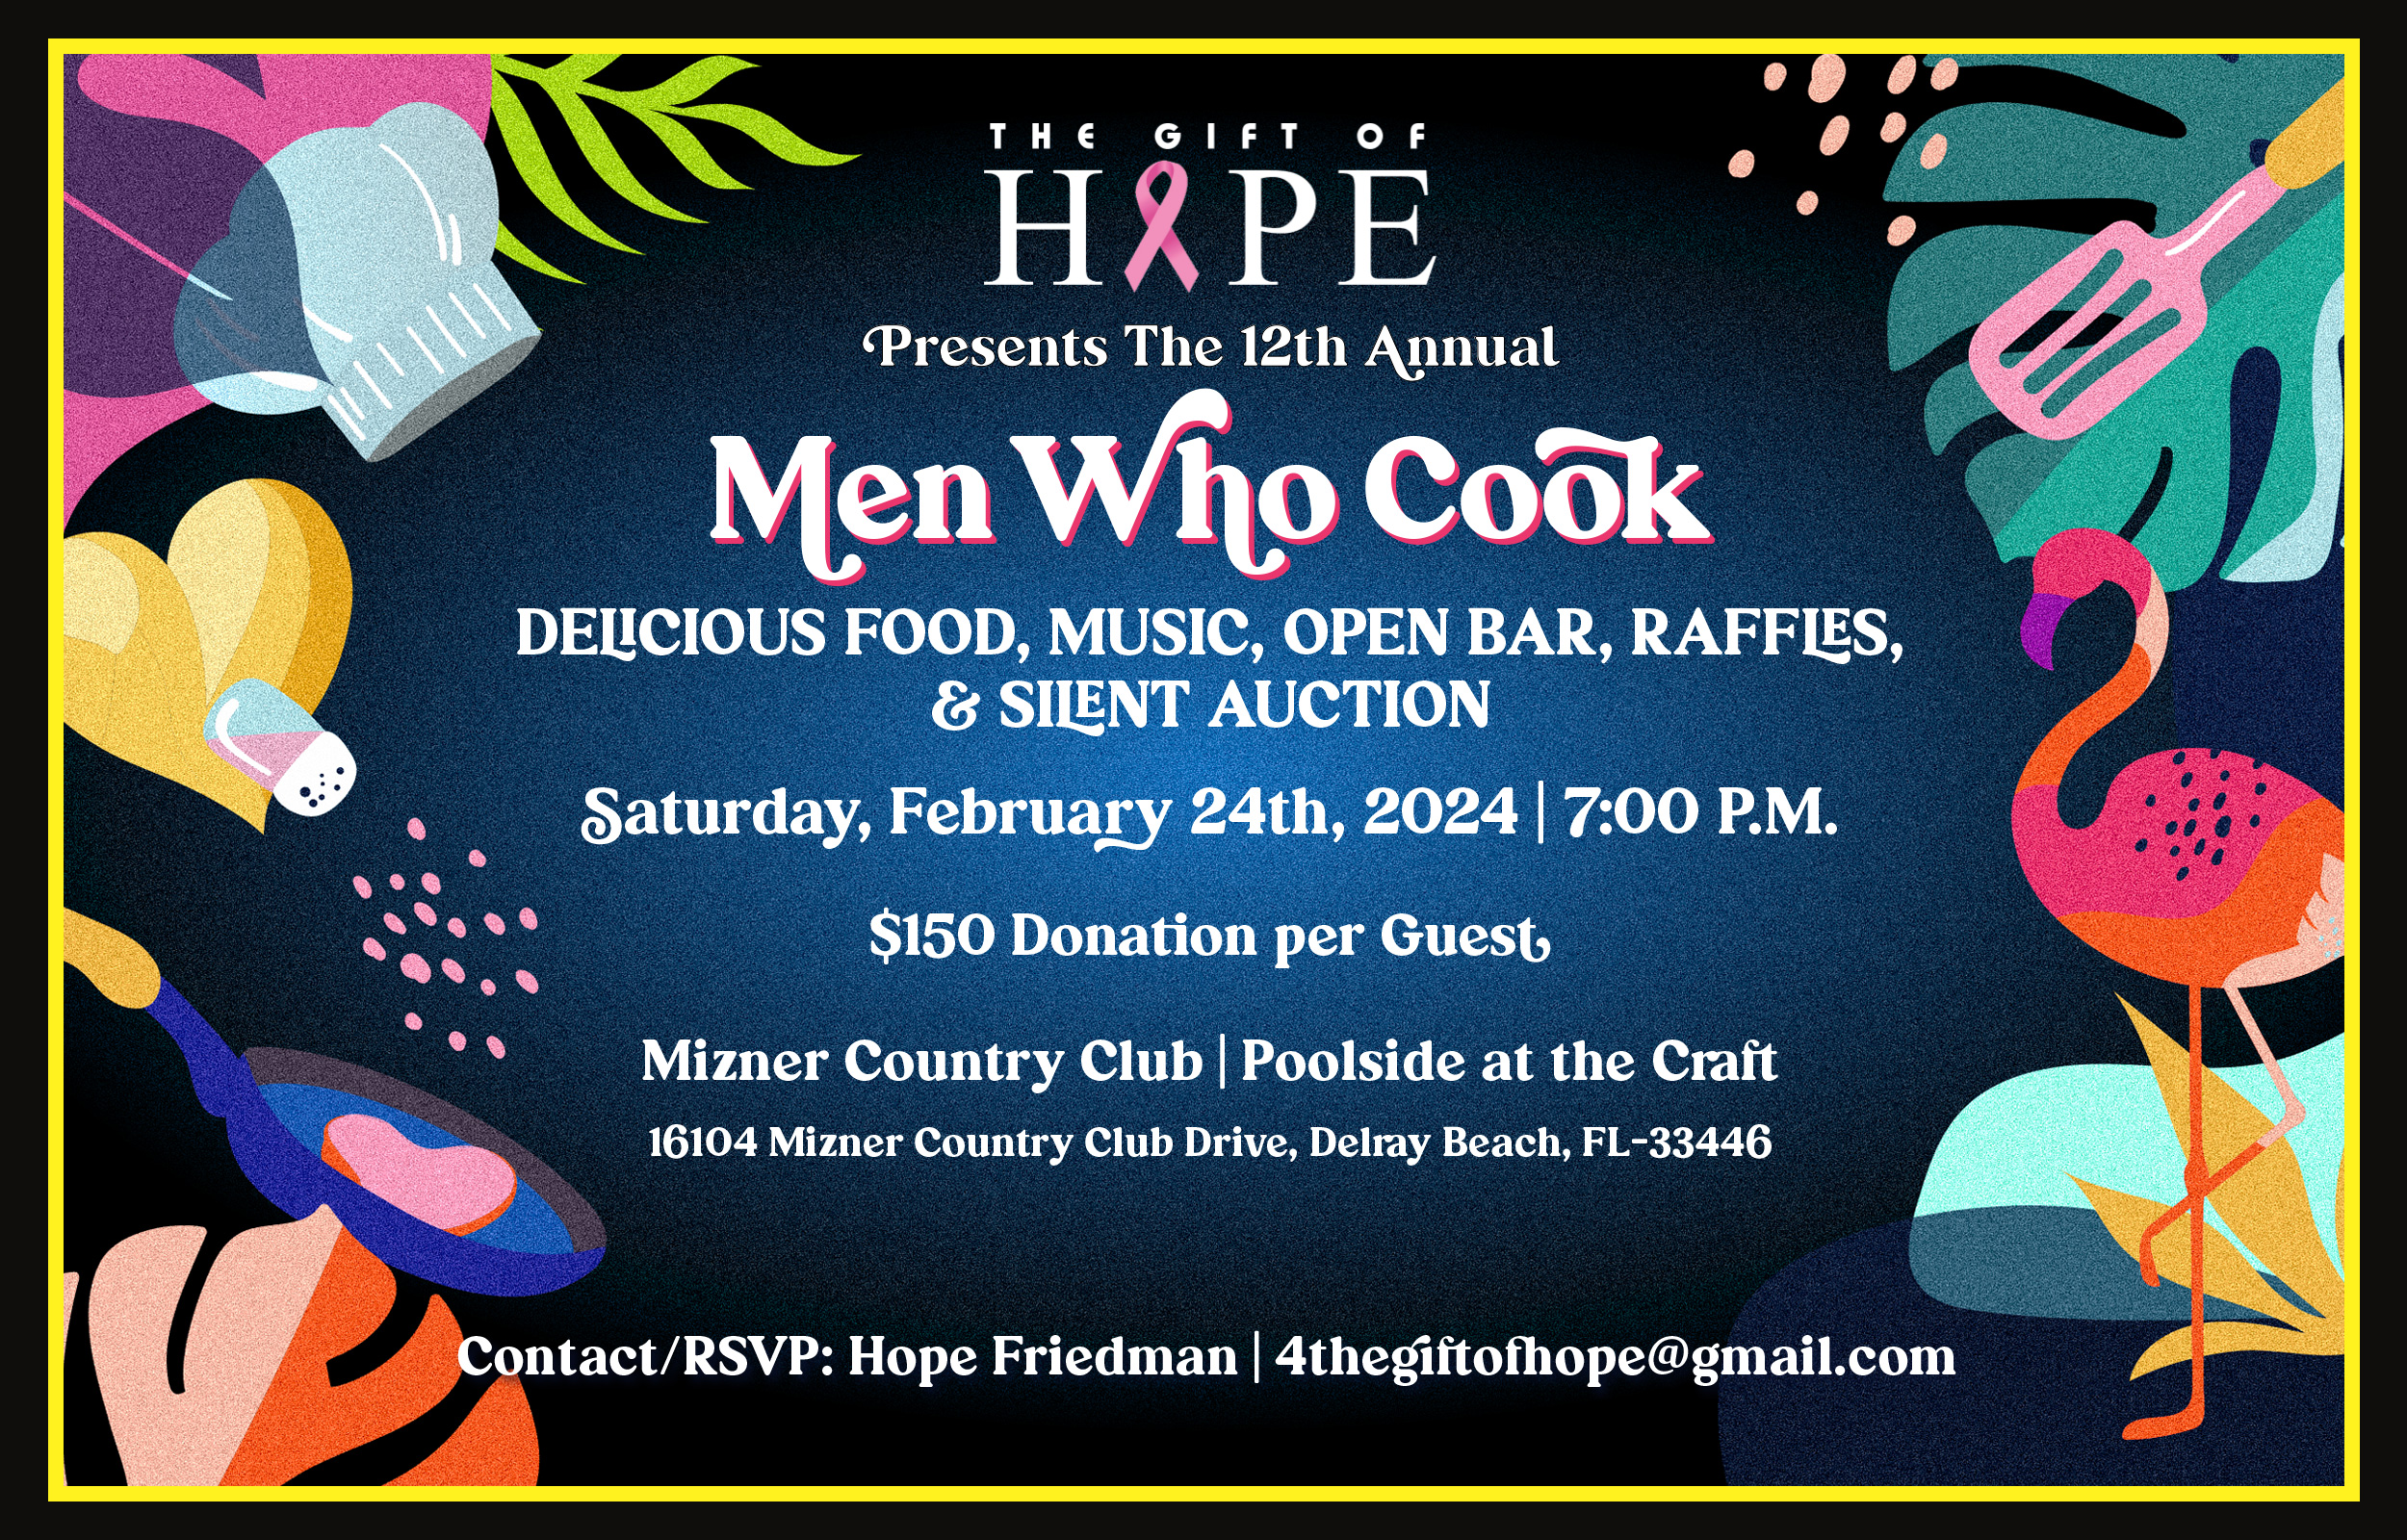 The 12th Annual Men Who Cook - 2024 - For The Gift of Hope